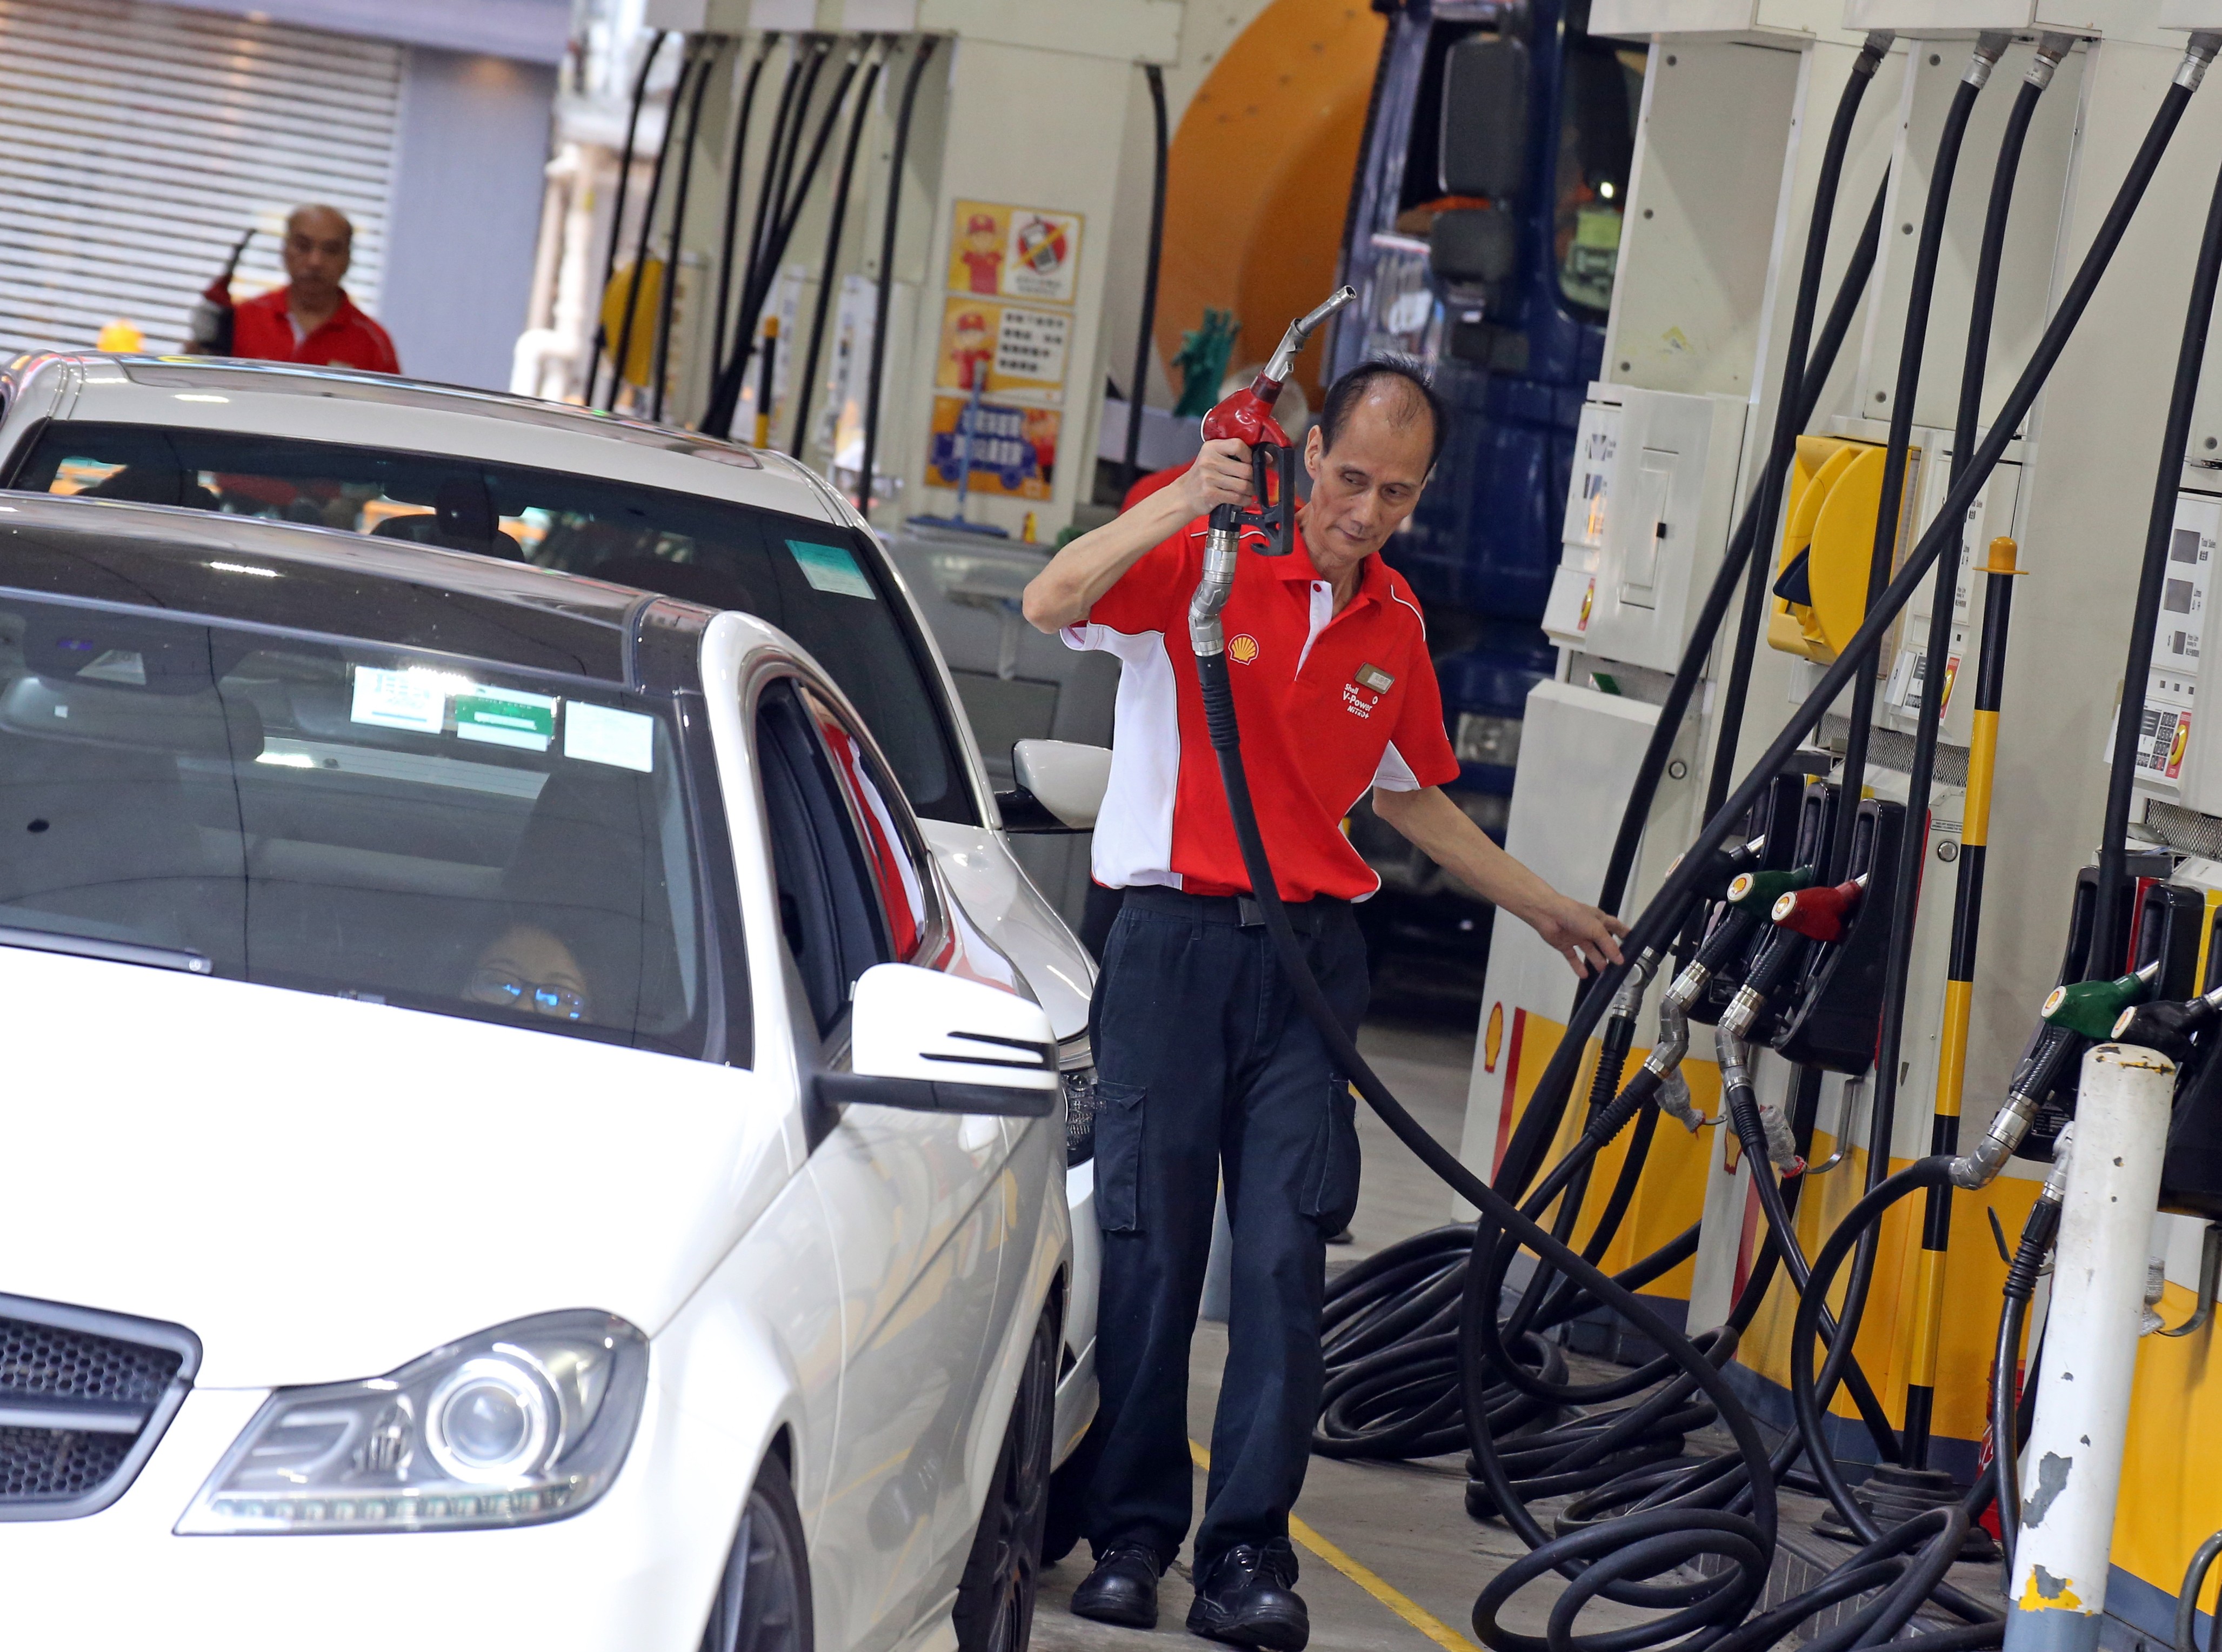 Commercial drivers are pressing the commission to probe petrol companies over high fuel prices. Photo: Felix Wong